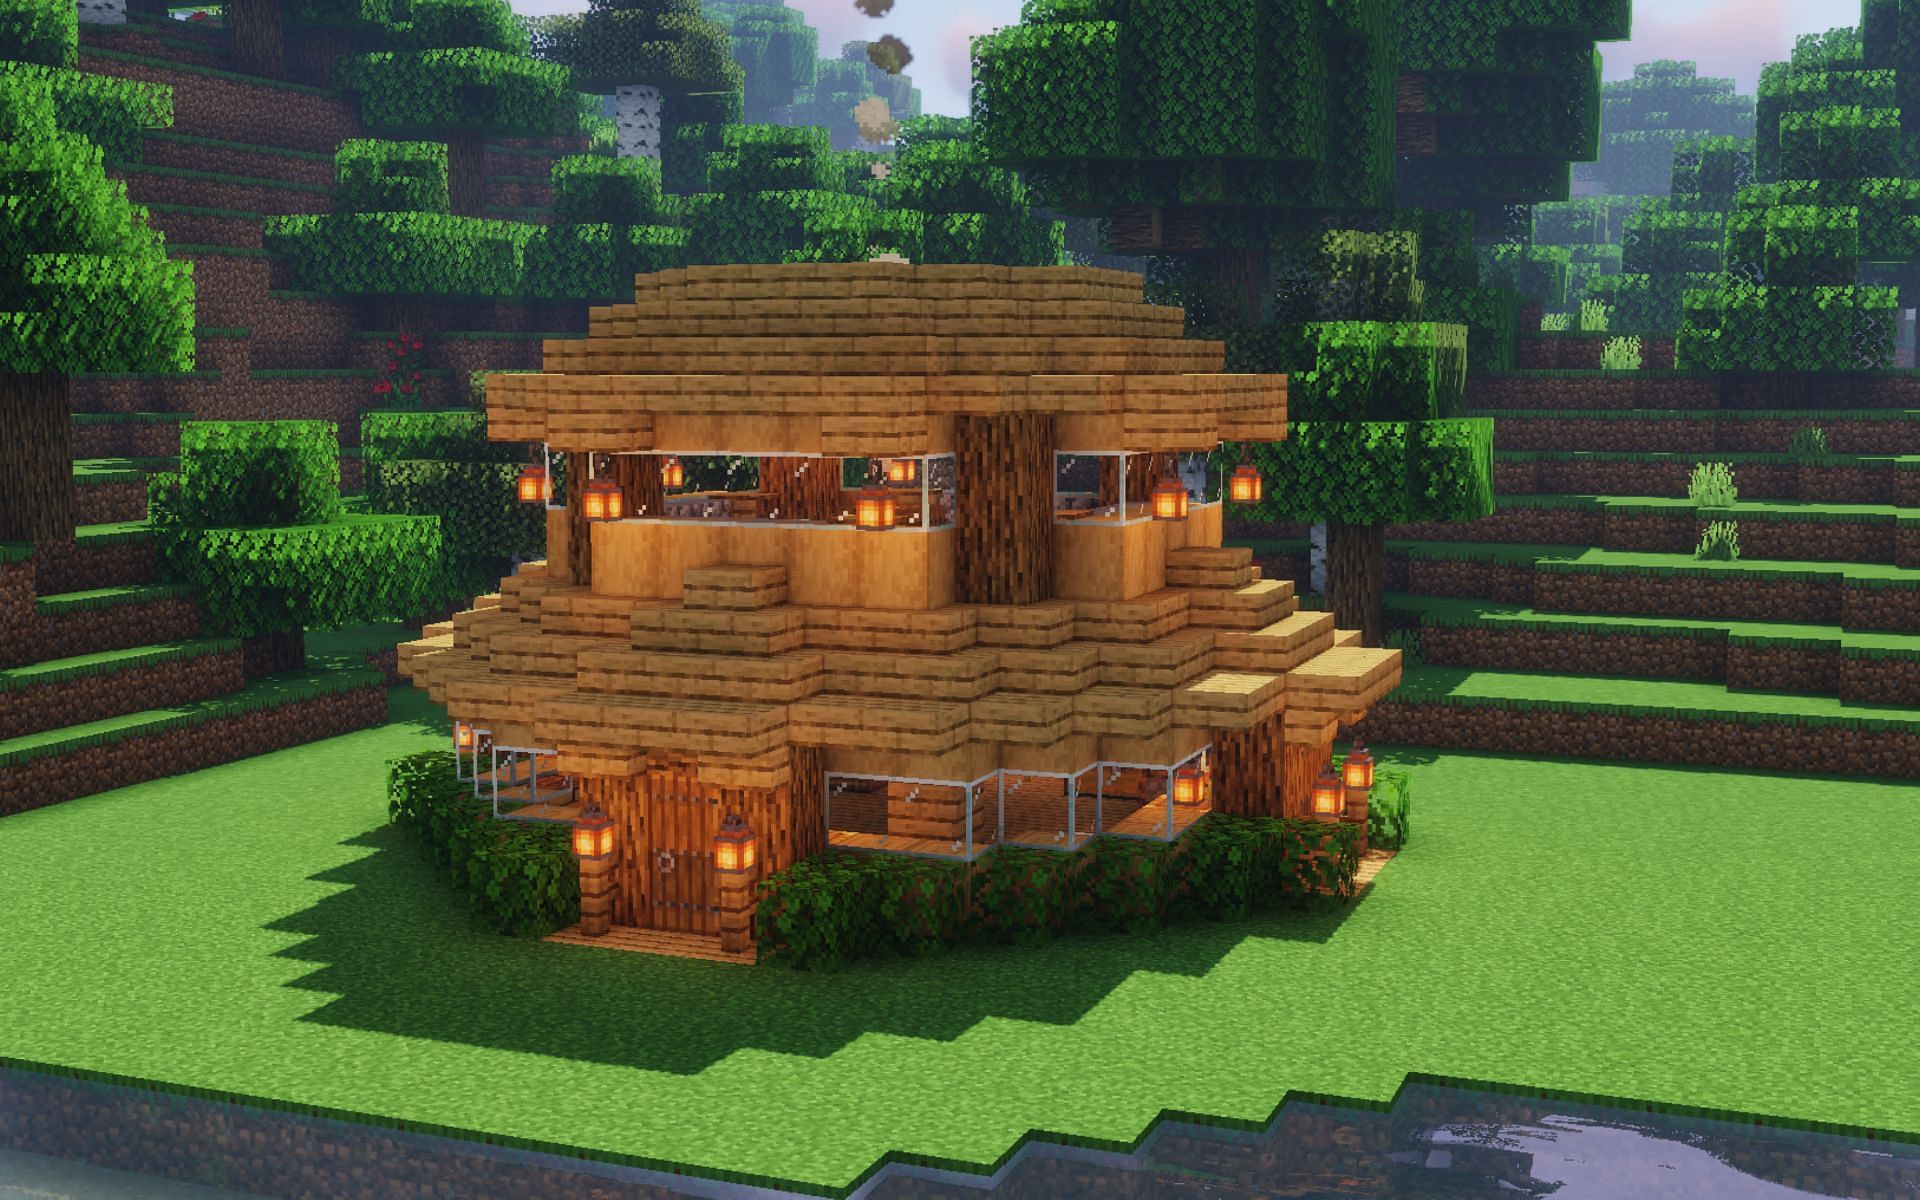 Minecraft Redditor showcases his beautiful survival house